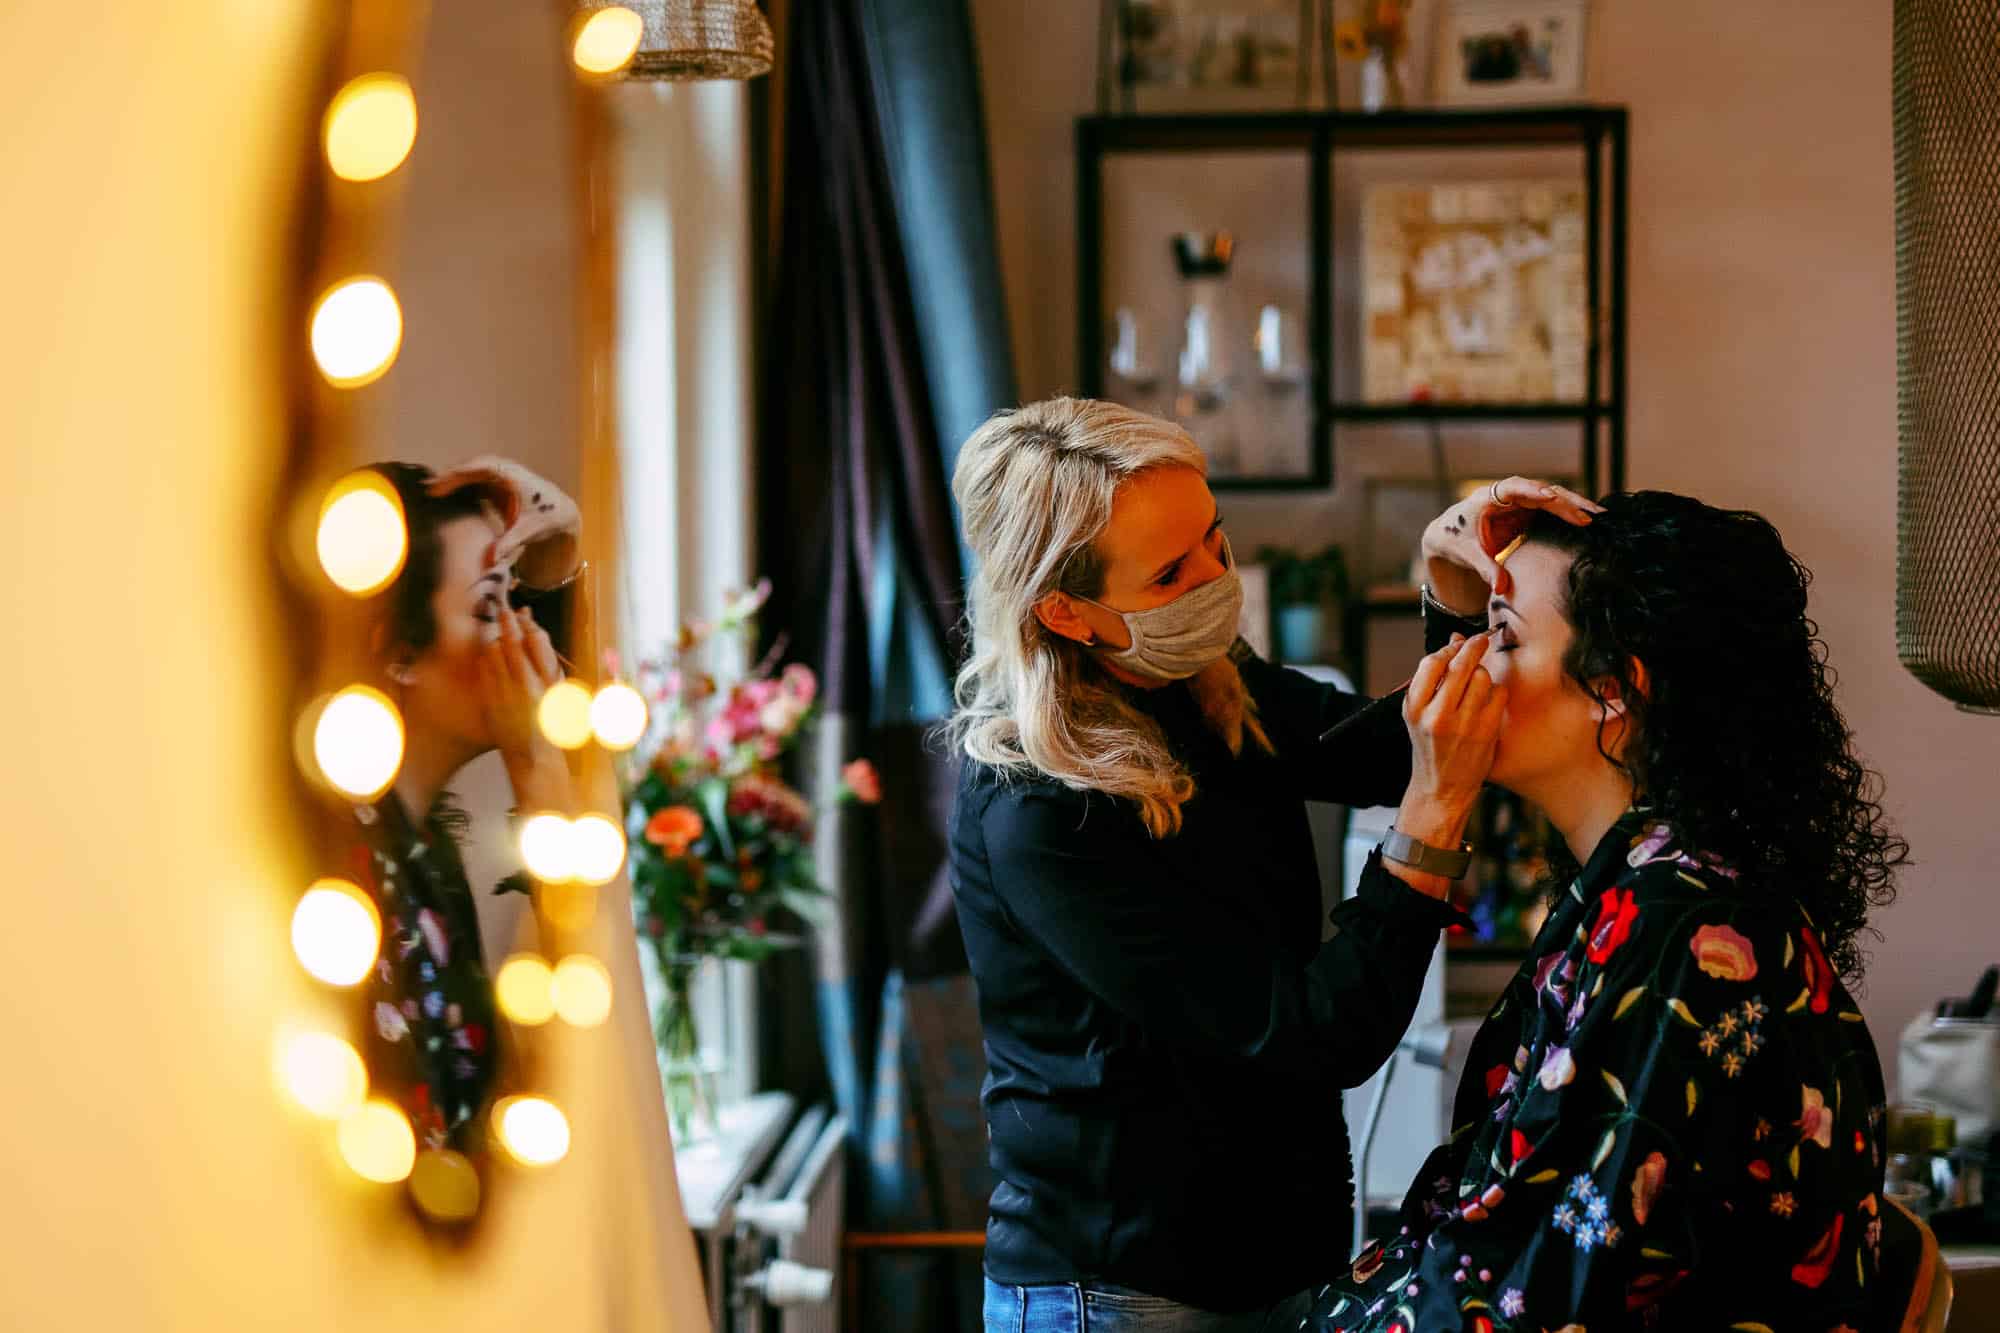 A woman having her bridal make-up done in front of the mirror.